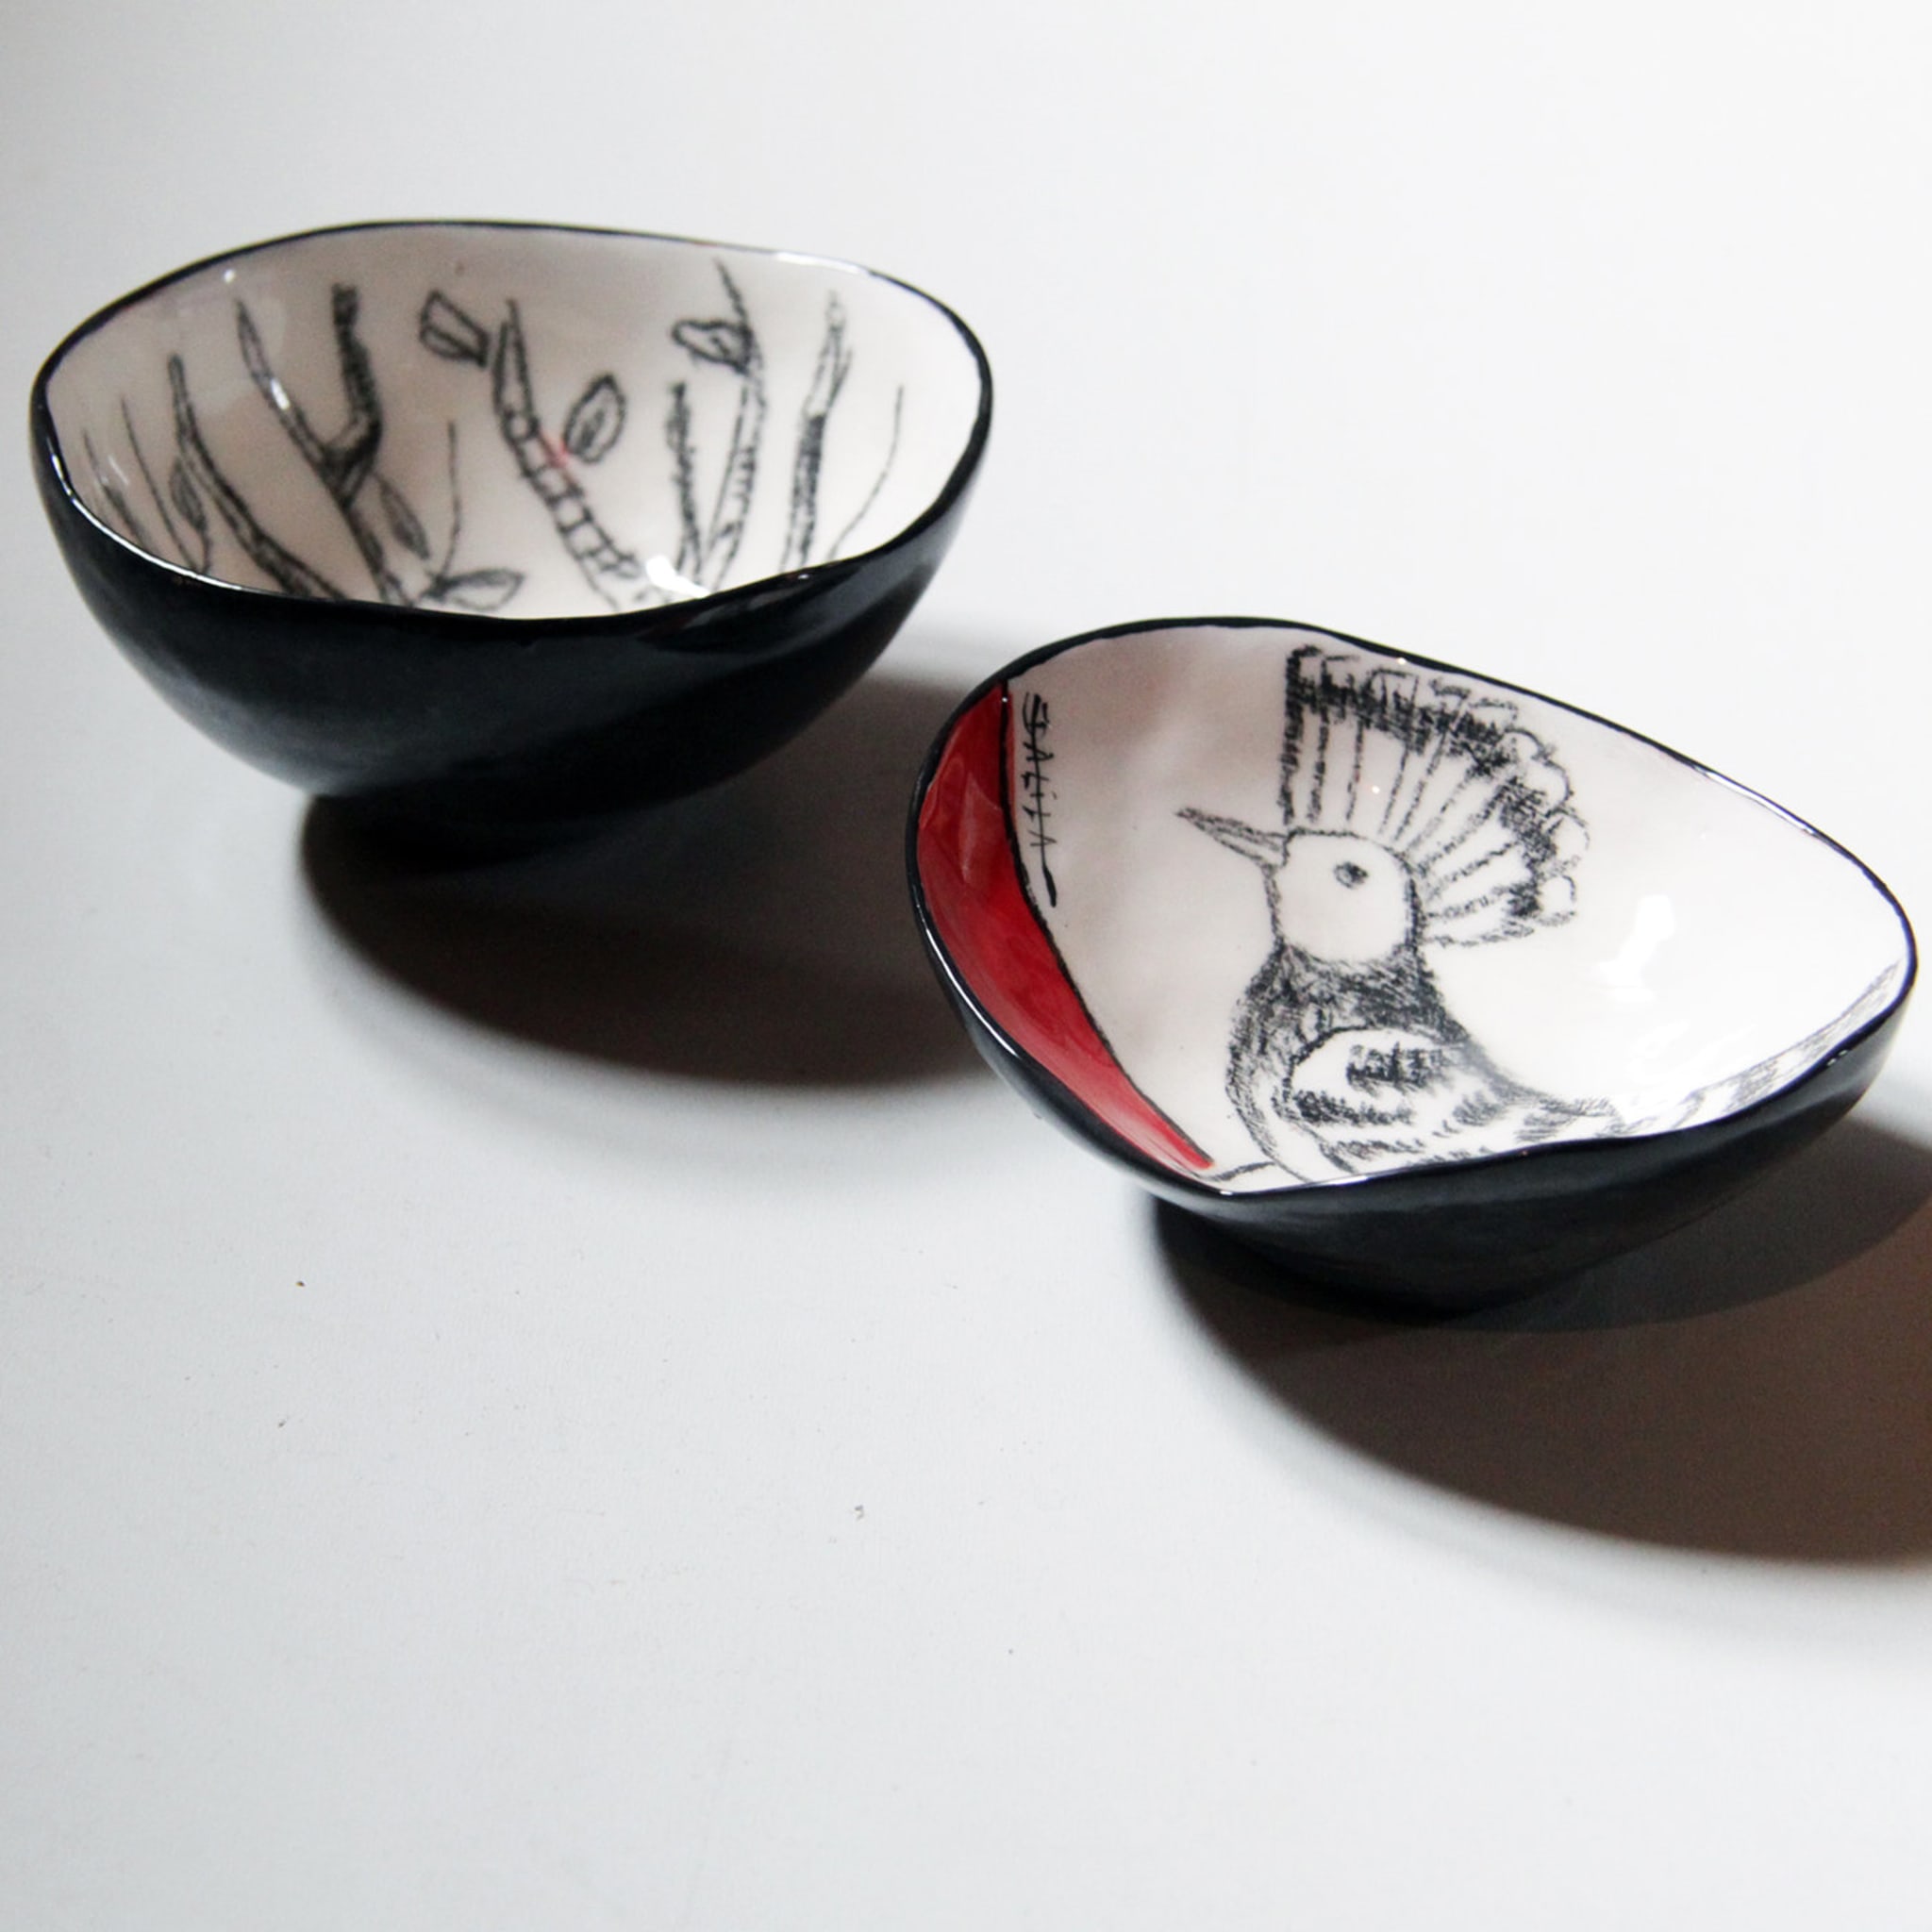 Hoopoe and Tree of Life Bowls - Alternative view 3